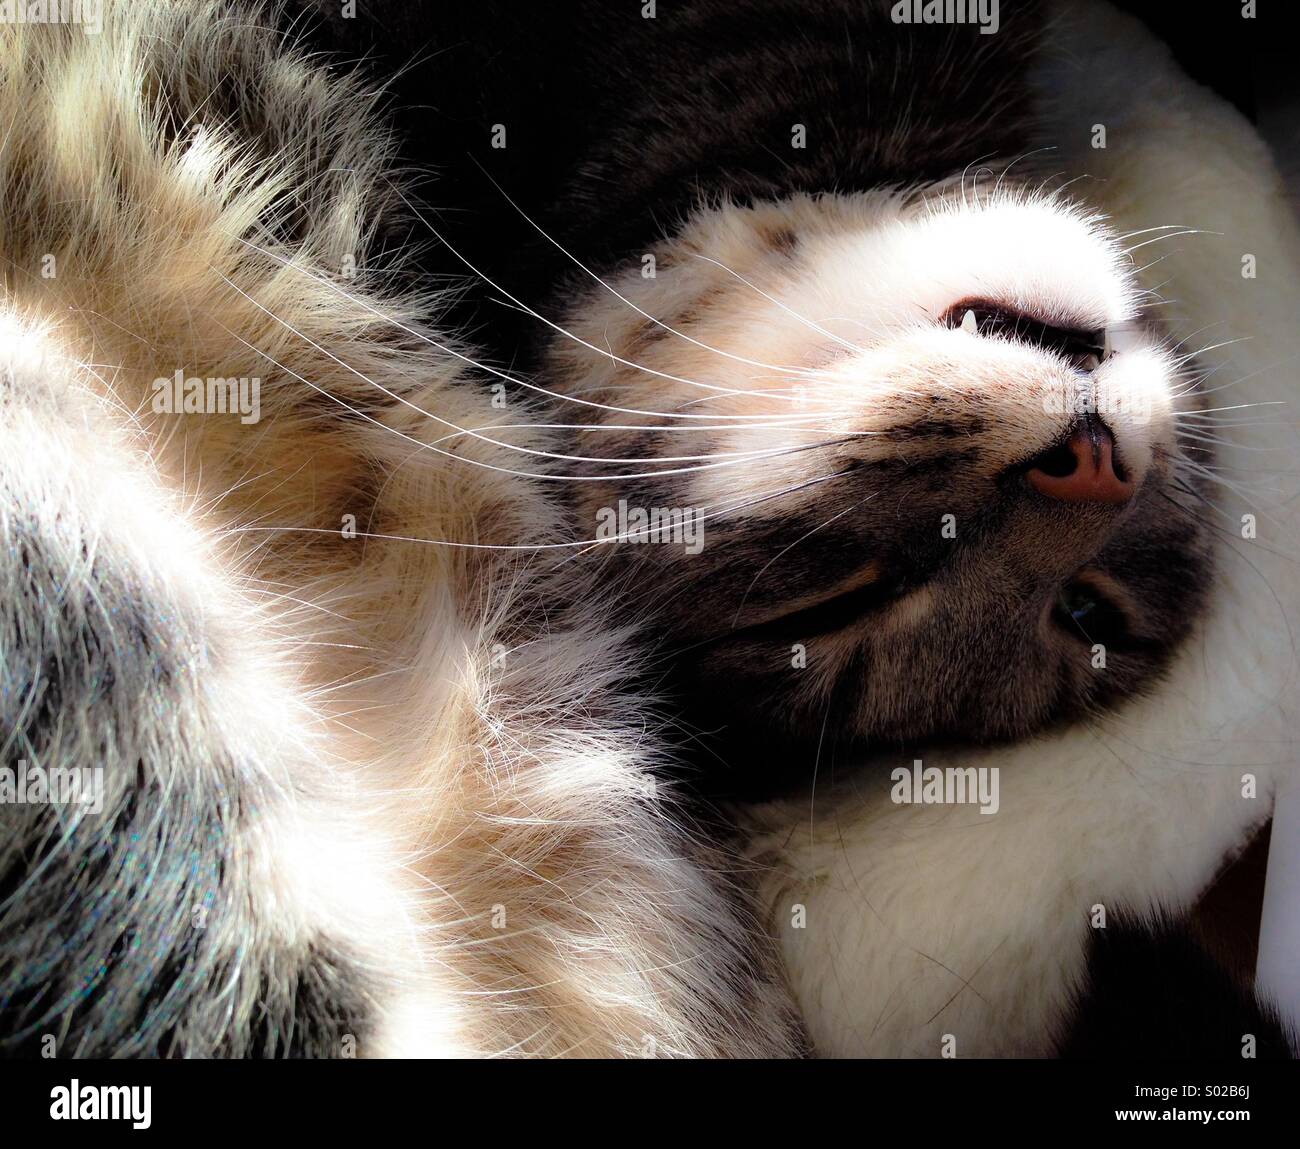 Tabby cat curled up napping Stock Photo